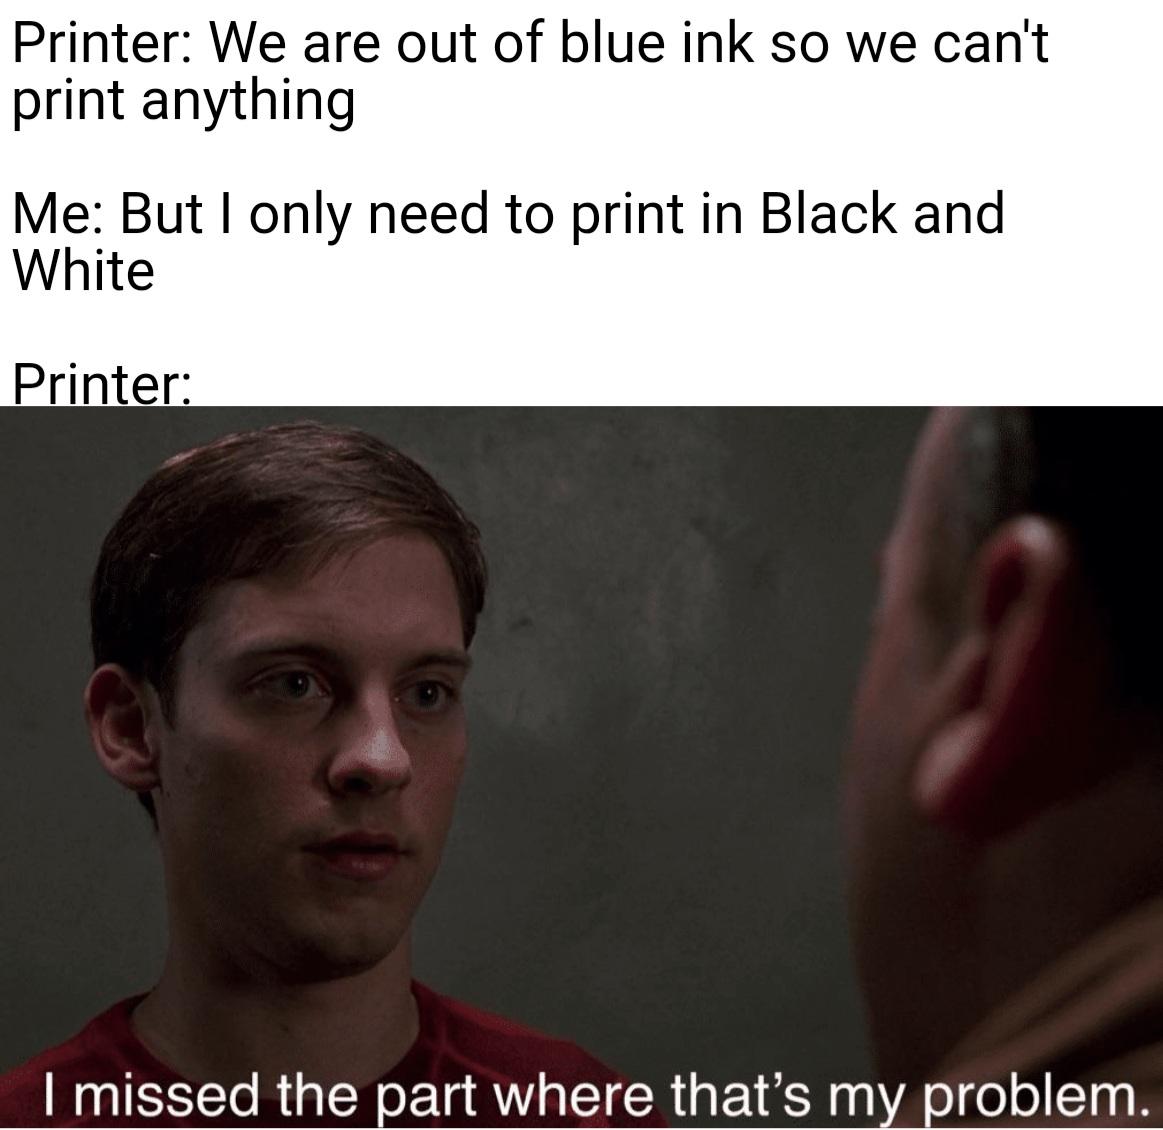 funny memes - dank memes - photo caption - Printer We are out of blue ink so we can't print anything Me But I only need to print in Black and White Printer I missed the part where that's my problem.